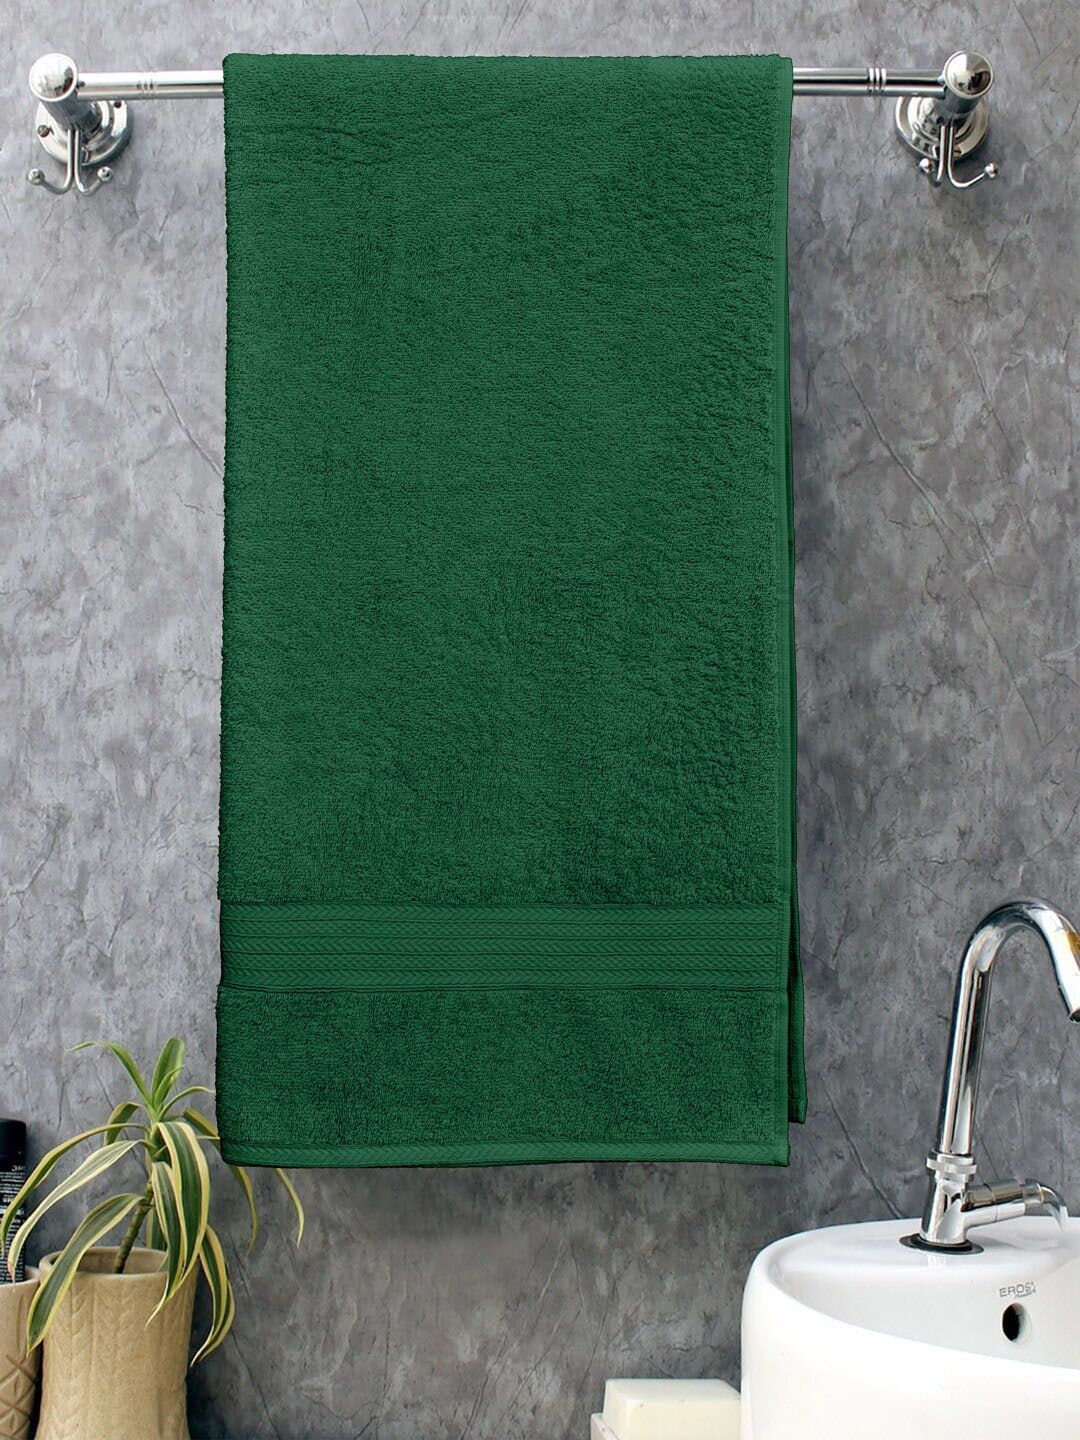 BOMBAY DYEING Green Solid Cotton 450 GSM Bath Towel Price in India